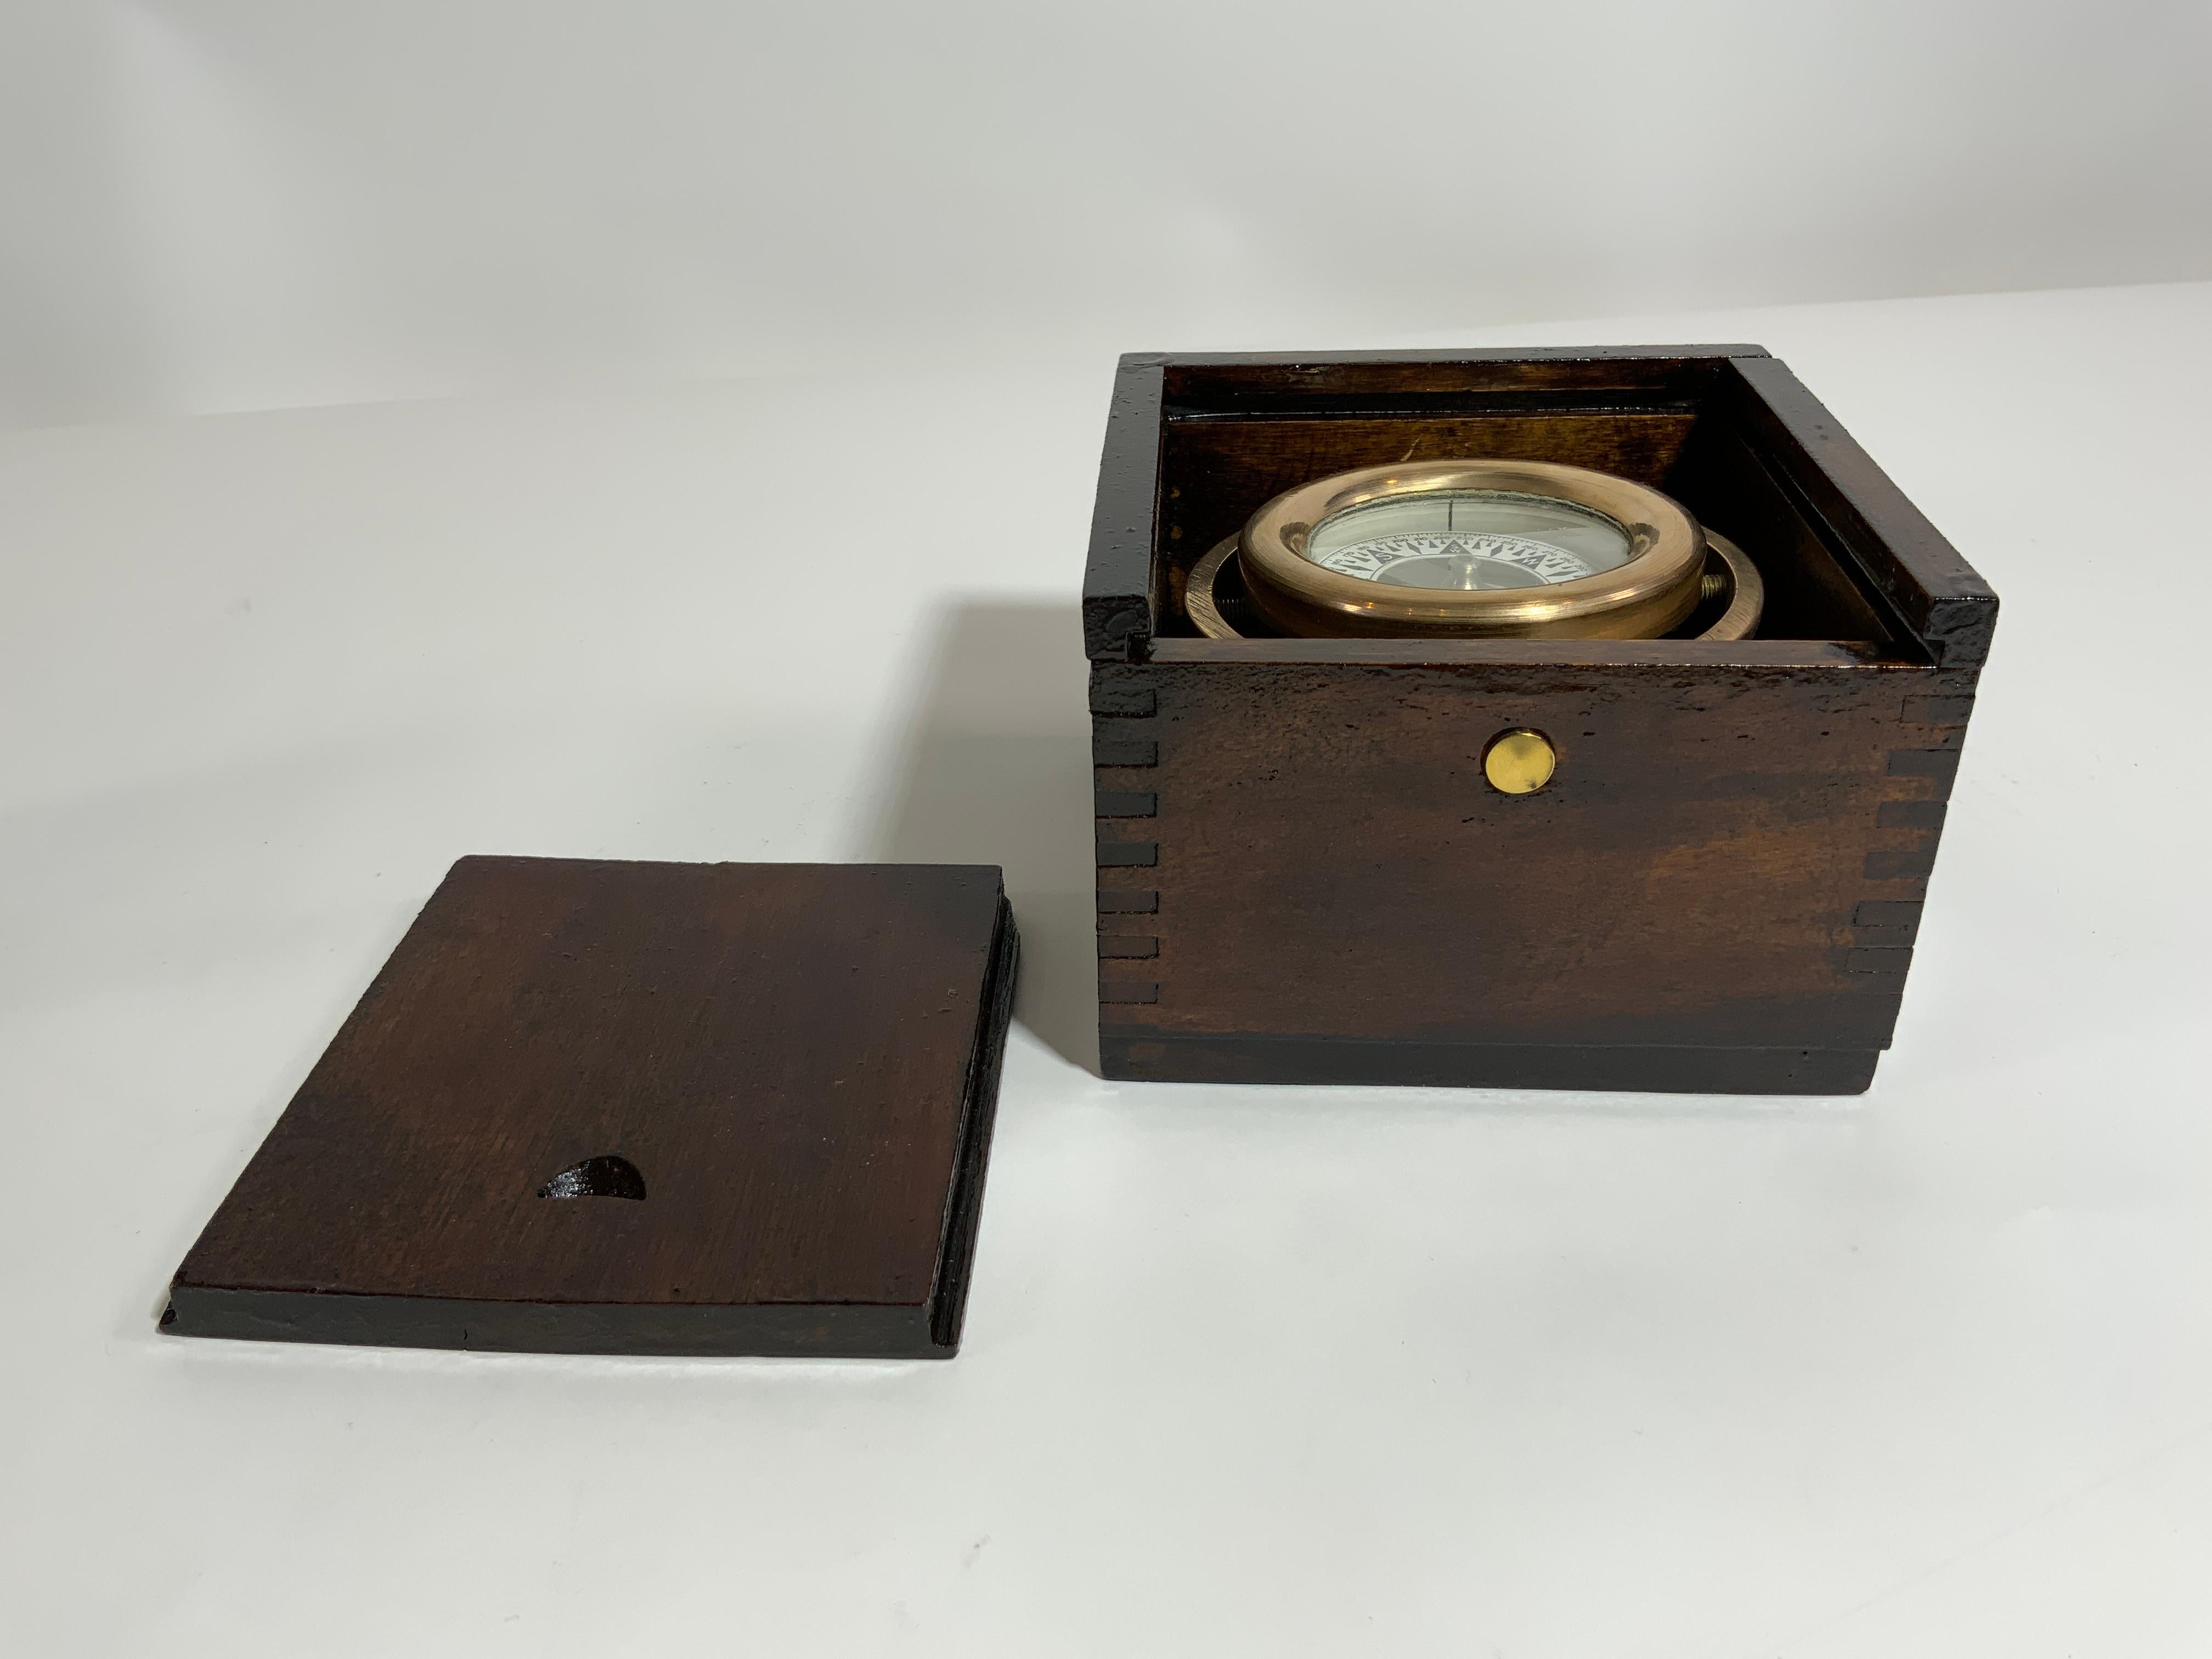 Polished brass boat compass by Wilcox Crittenden of Middletown, Connecticut. Fitted to a varnished, dovetailed box. Sliding lid. Great little relic. Circa 1940.

 Overall Dimensions: 5